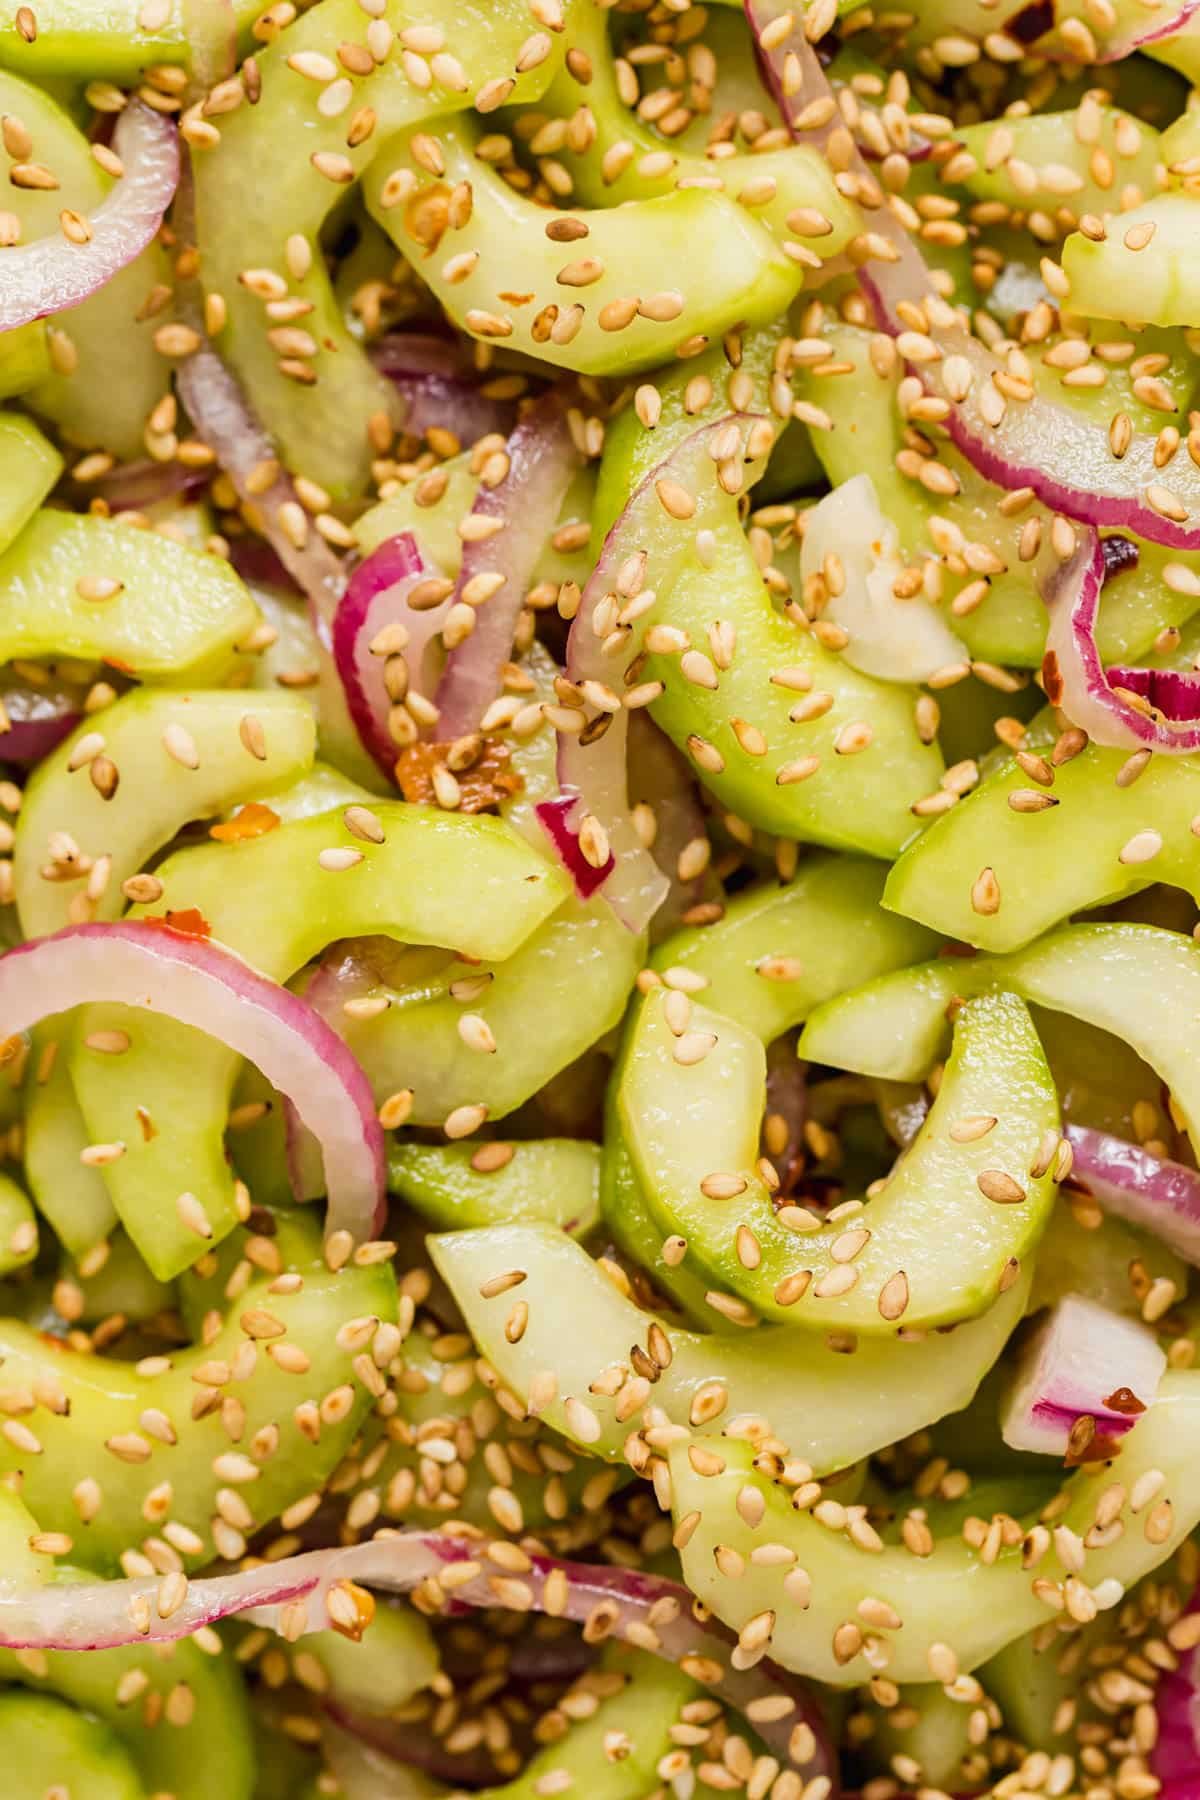 A zoomed in image of the cucumber and onions in the salad with red pepper flakes and sesame seeds sprinkled on.